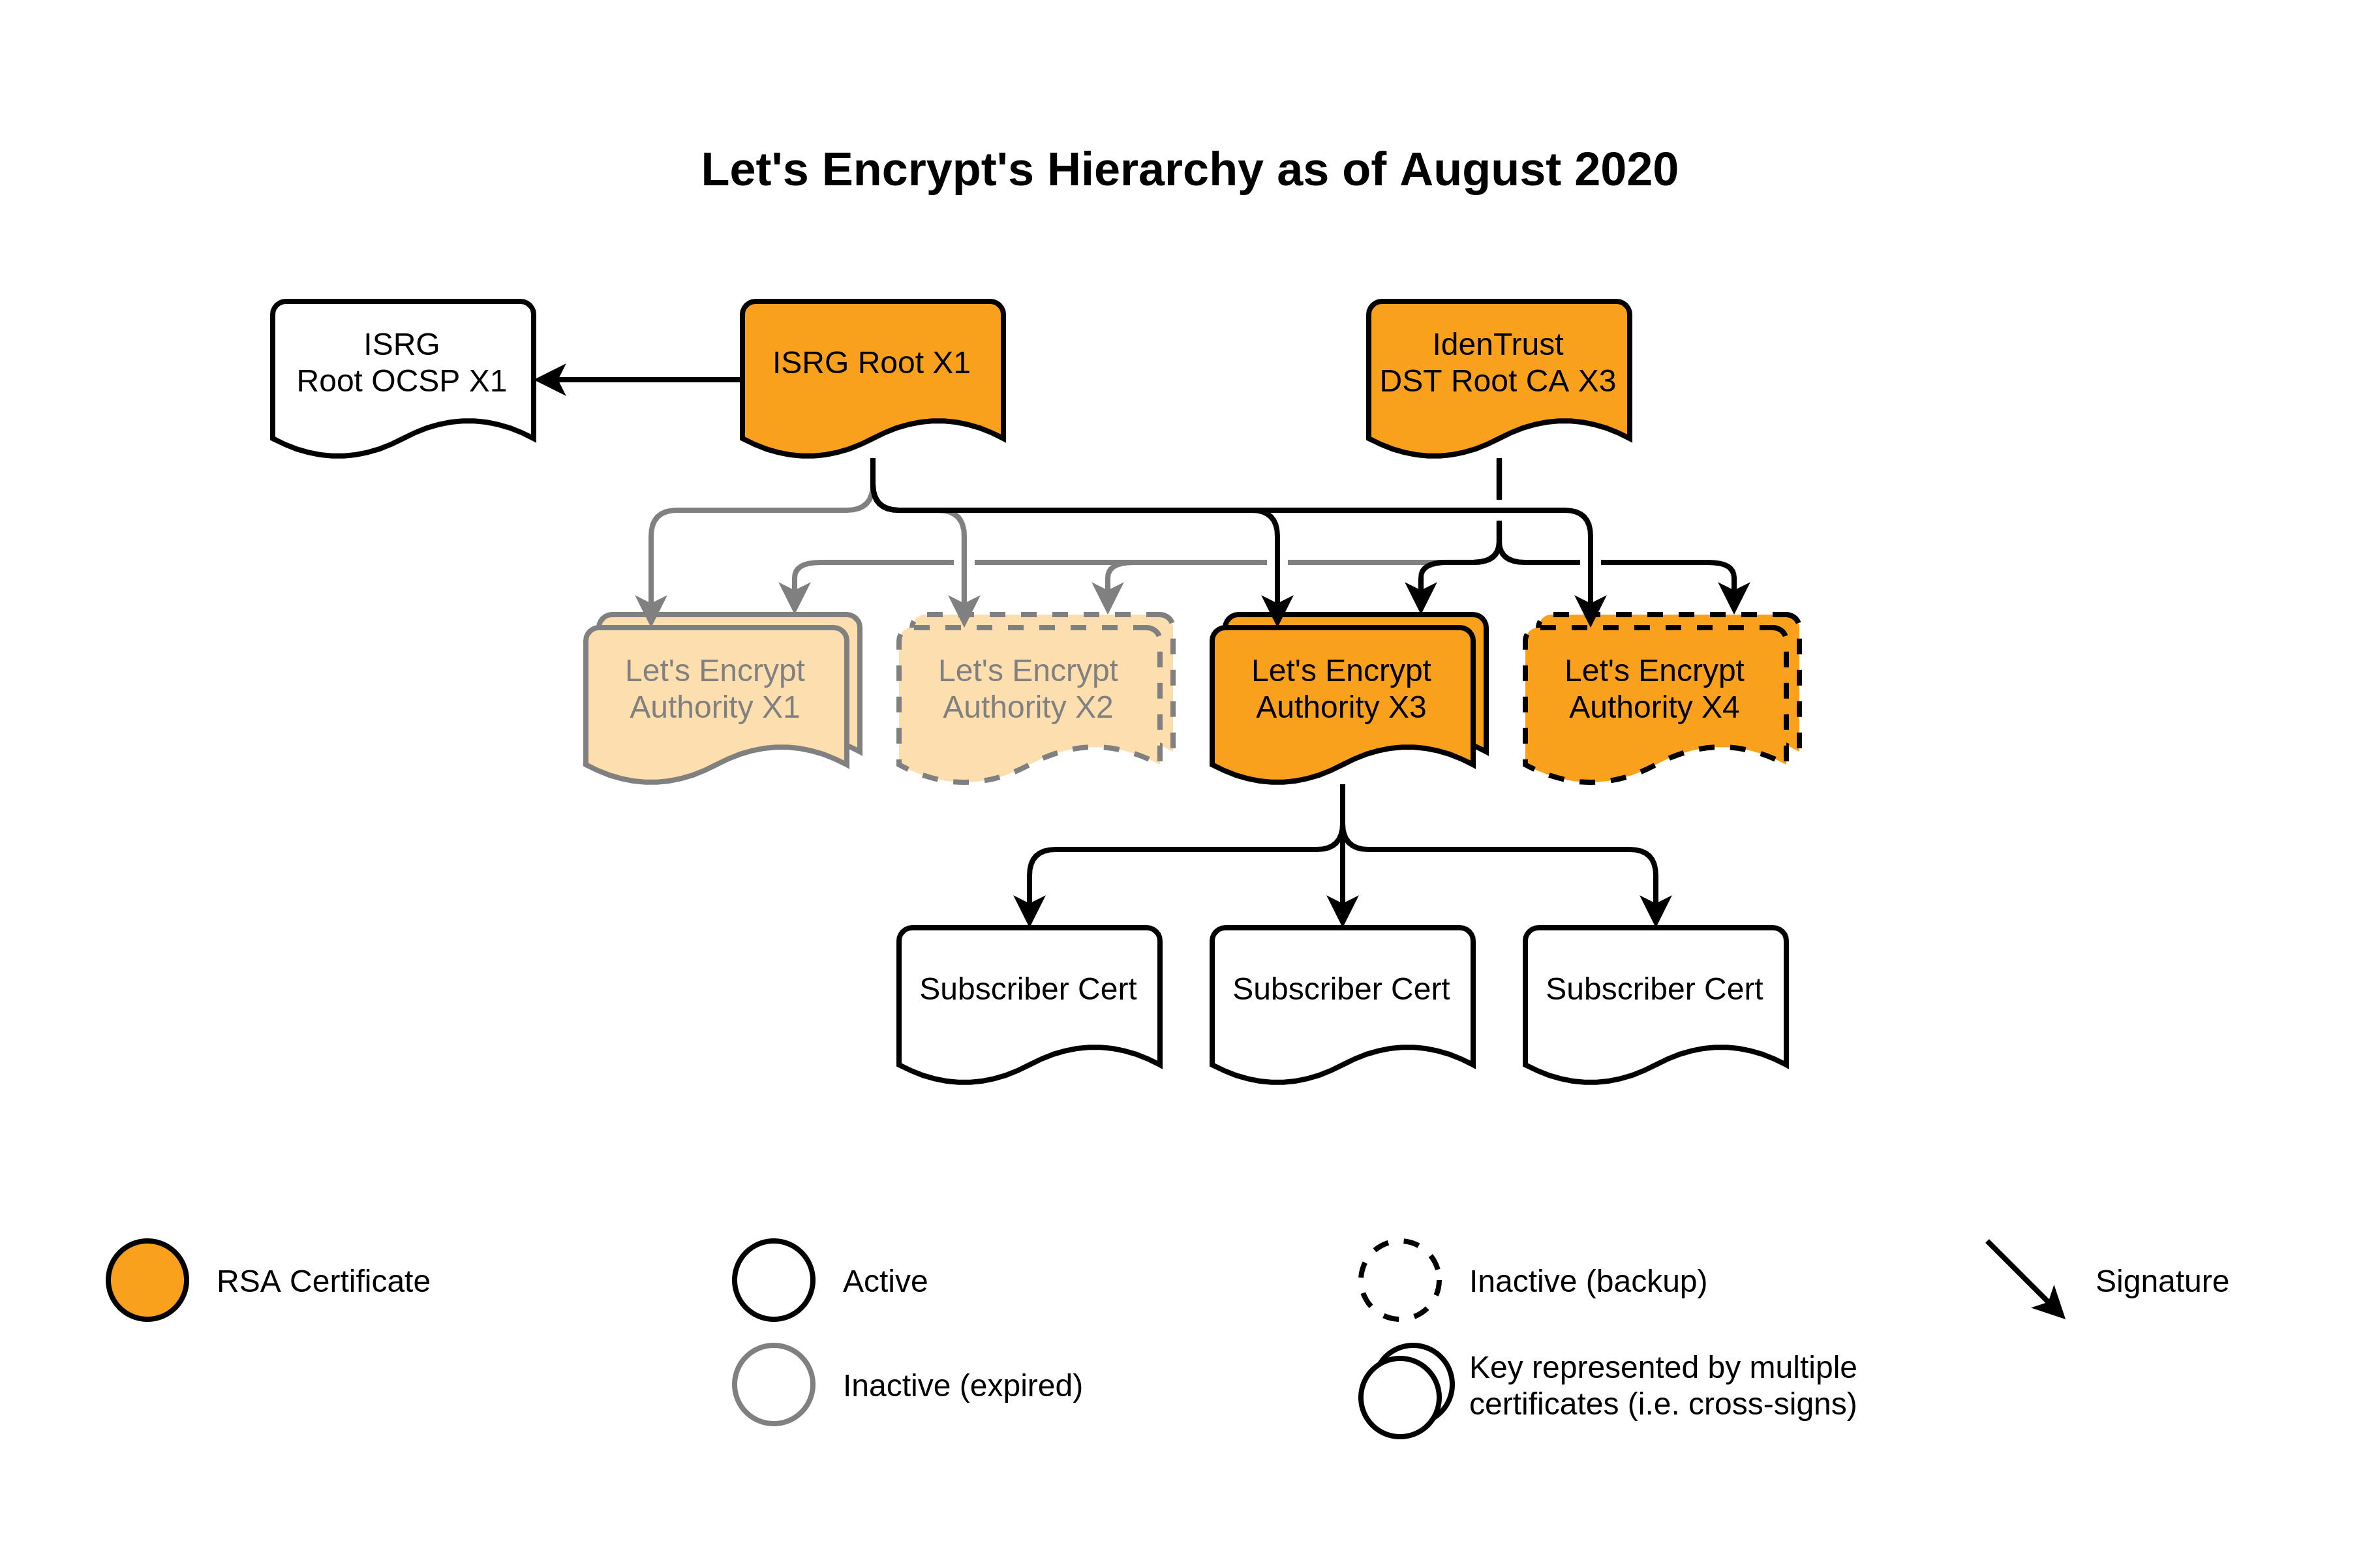 Let’s Encrypt’s hierarchy as of August 2020